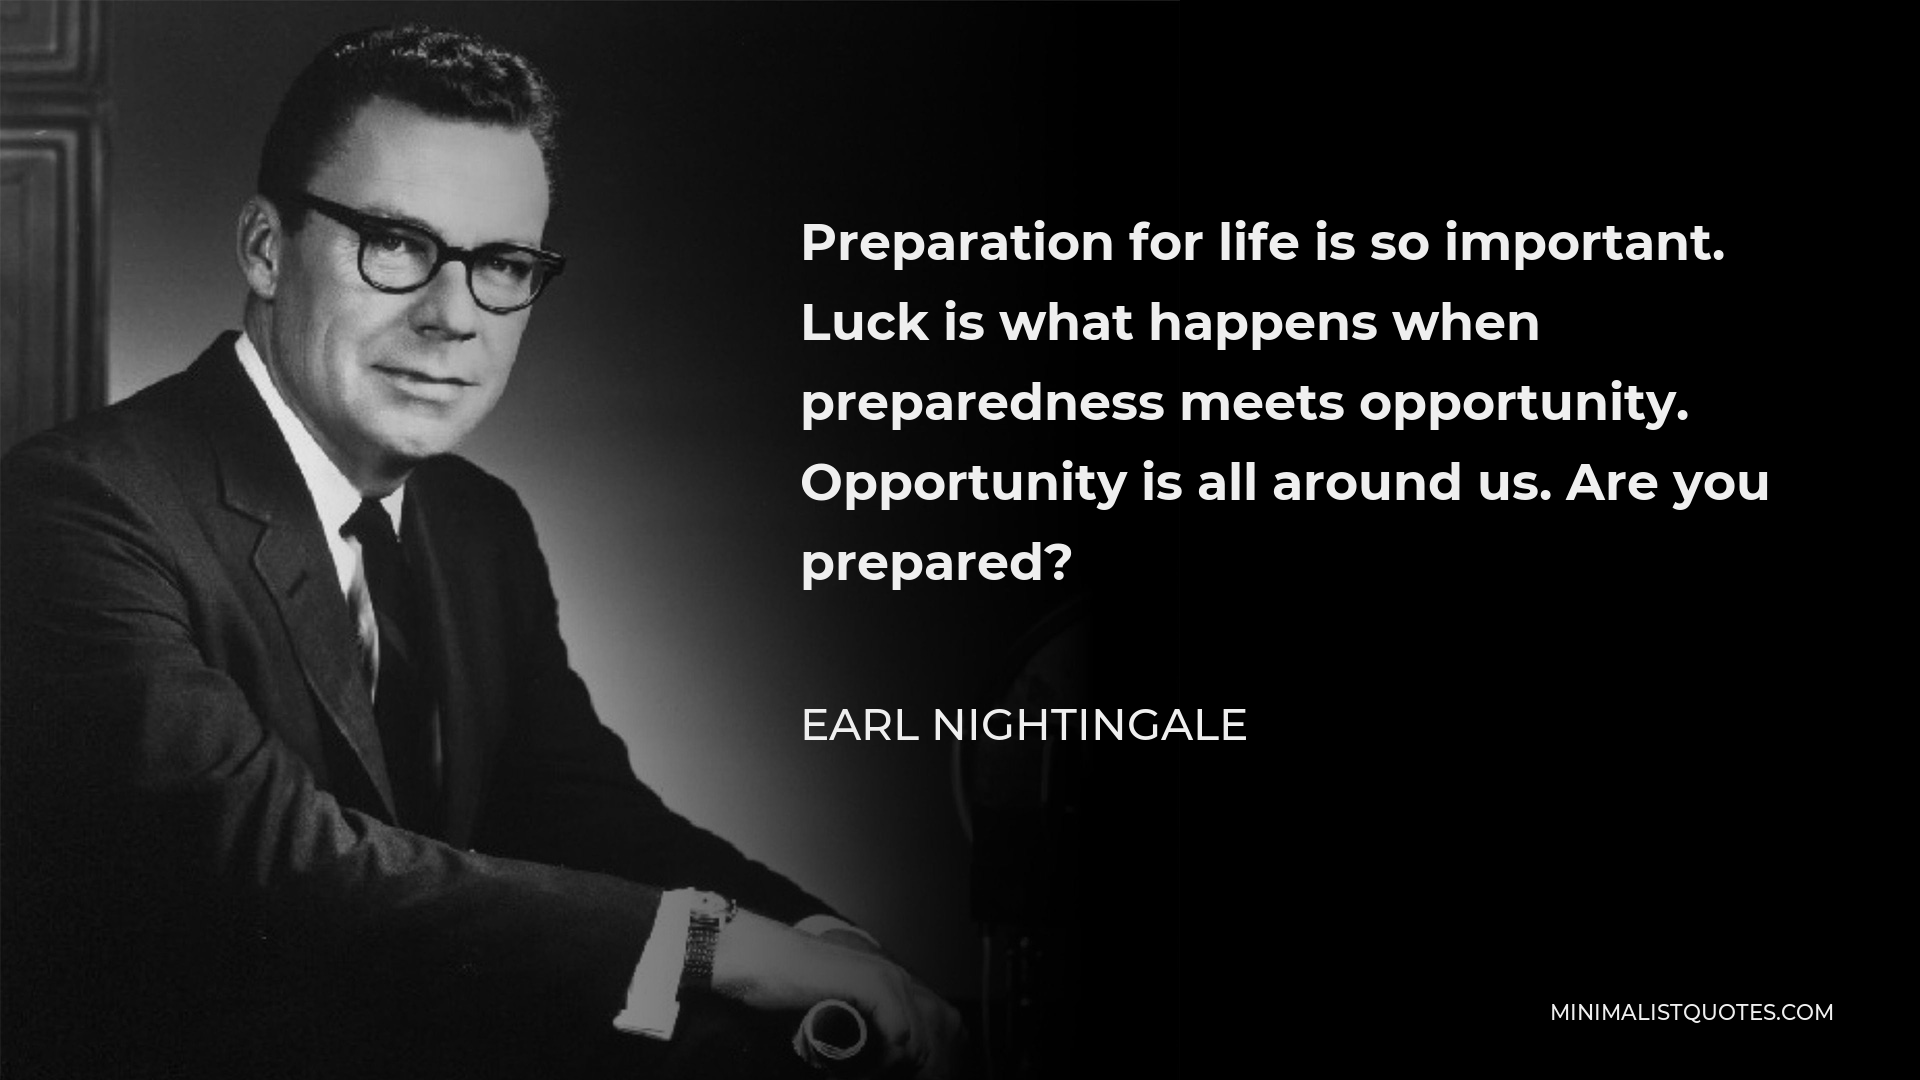 Earl Nightingale Quote - Preparation for life is so important. Luck is what happens when preparedness meets opportunity. Opportunity is all around us. Are you prepared?